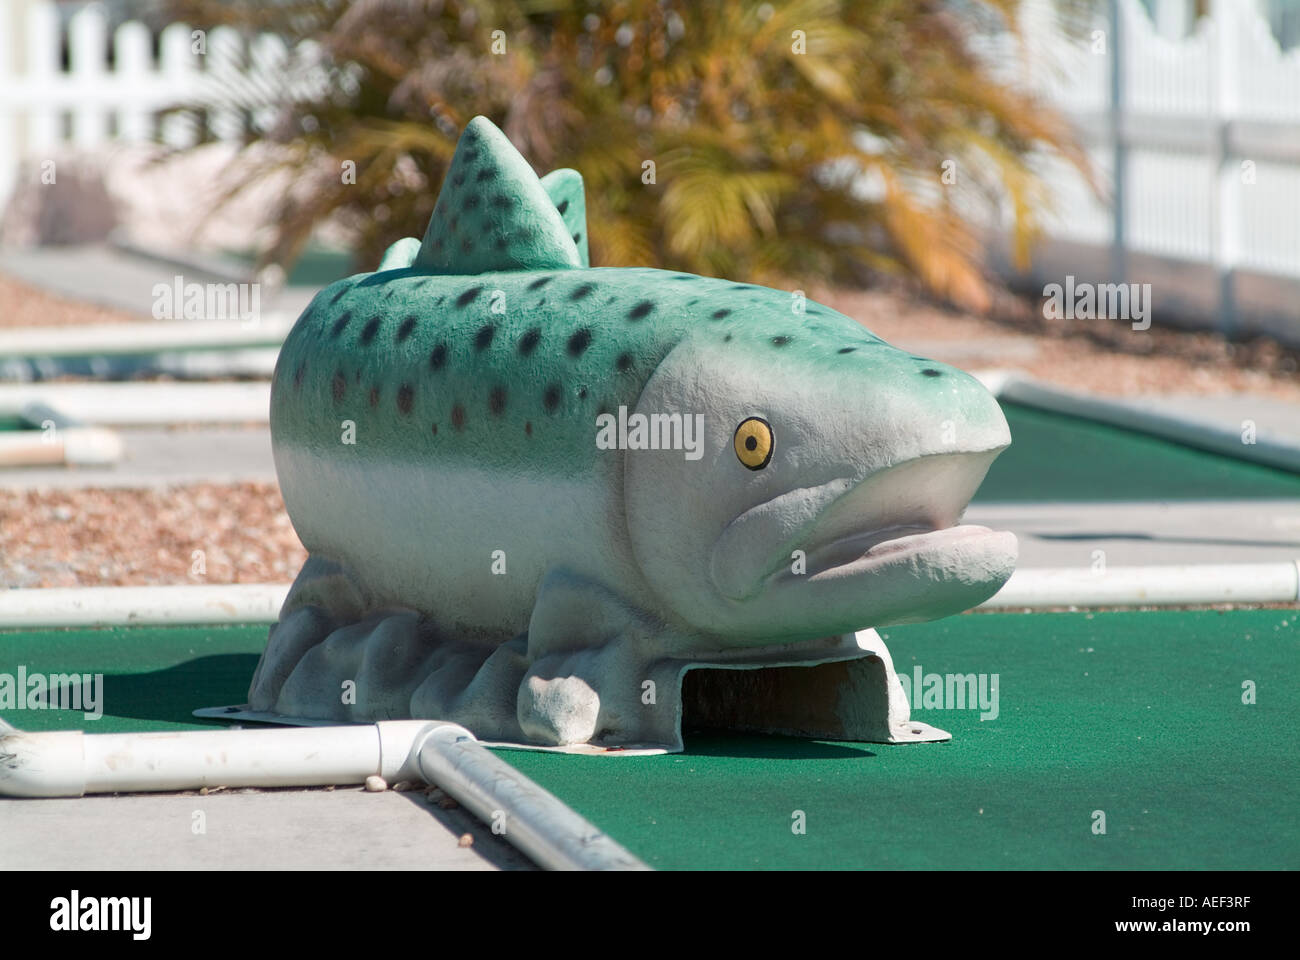 miniature golf course characters obstacles fish Stock Photo